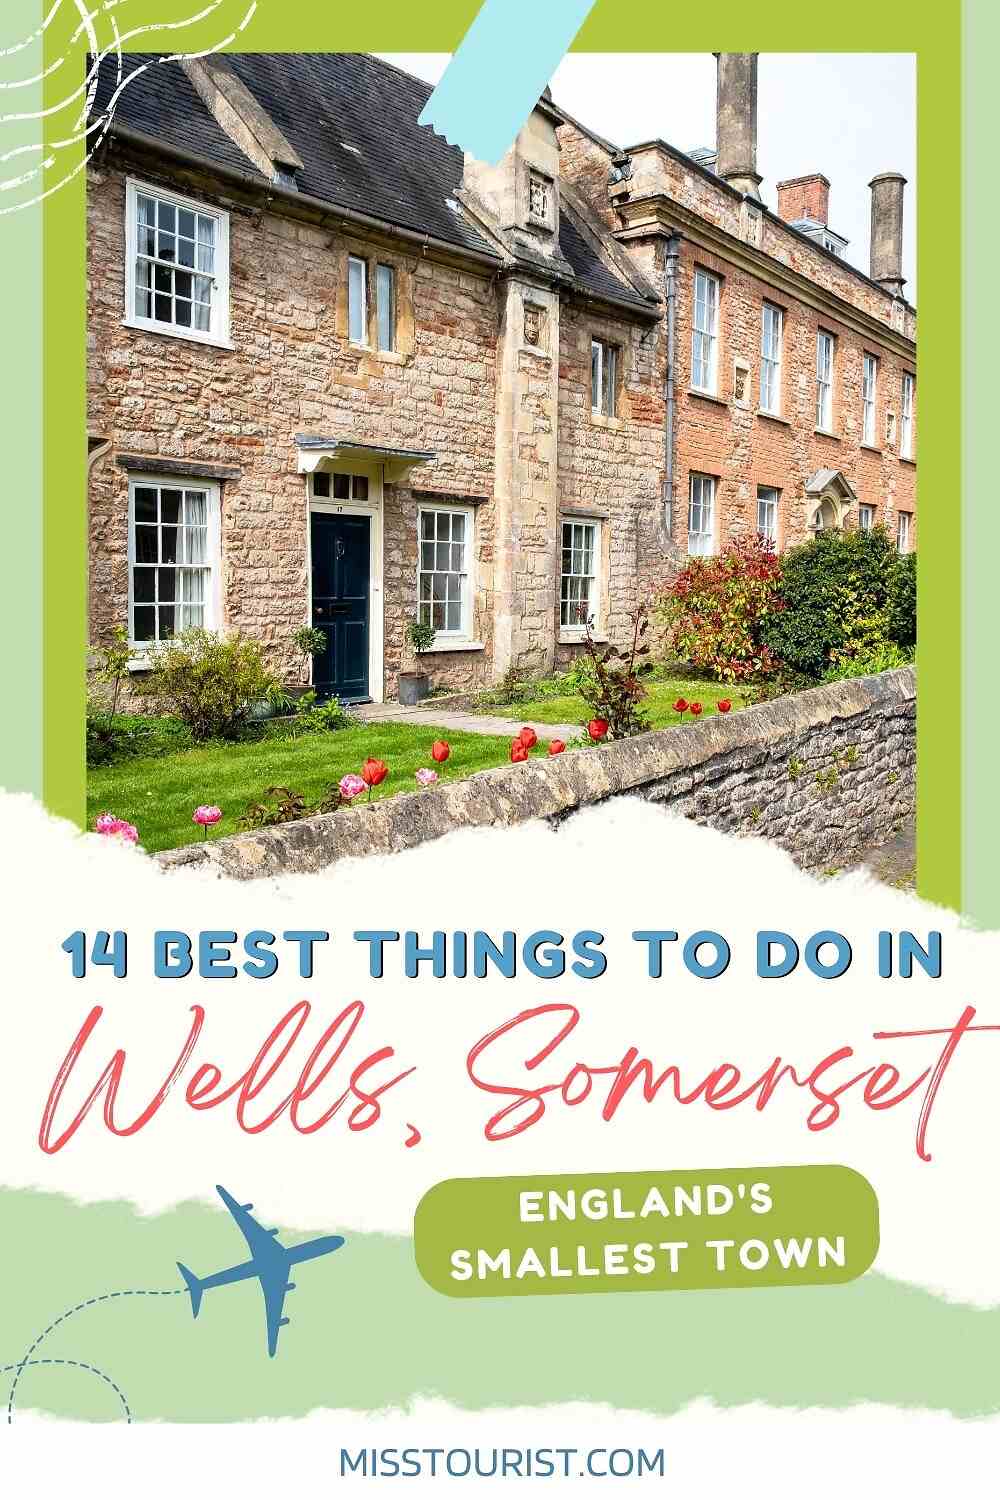 A promotional image for a travel blog post titled "14 Best Things to Do in Wells, Somerset," featuring a row of historic houses and a green banner stating "England's Smallest Town.